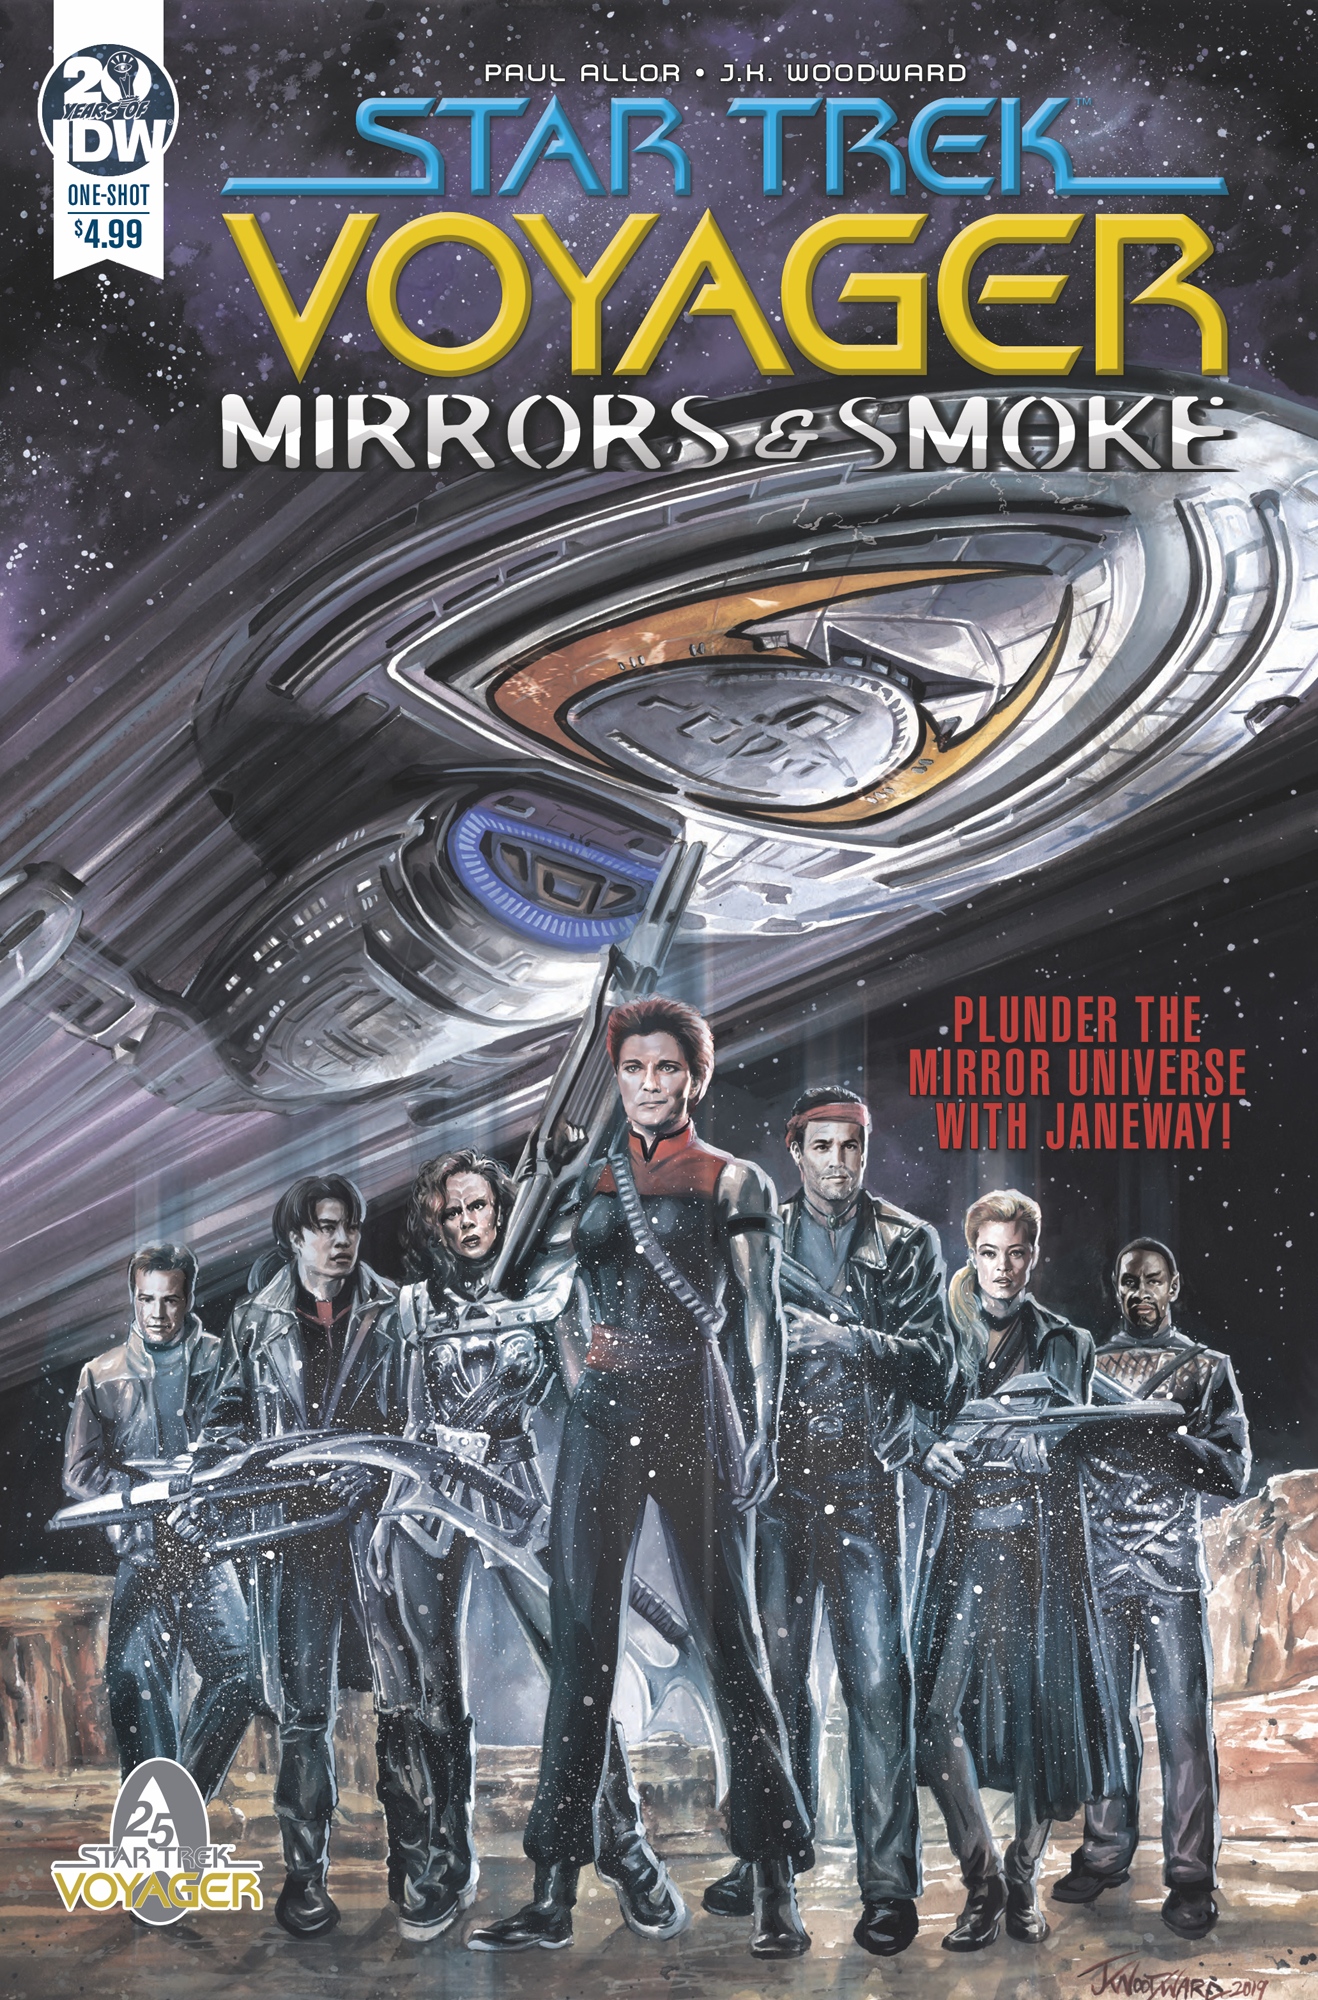 STAR TREK VOYAGER: MIRRORS AND SMOKE regular cover by J K Woodward